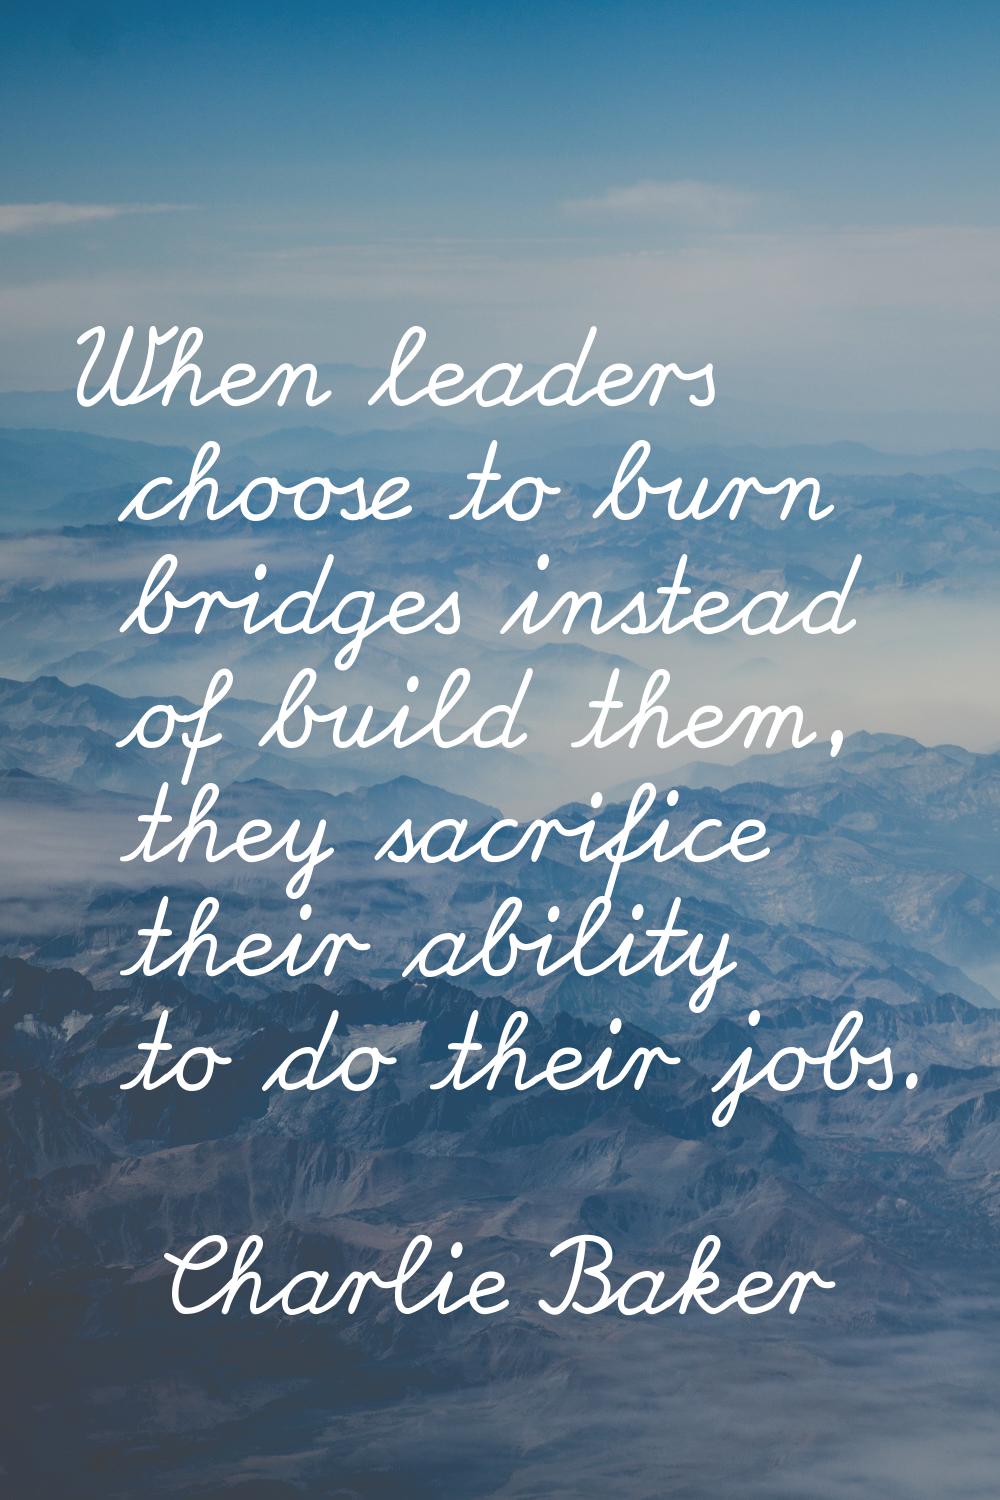 When leaders choose to burn bridges instead of build them, they sacrifice their ability to do their